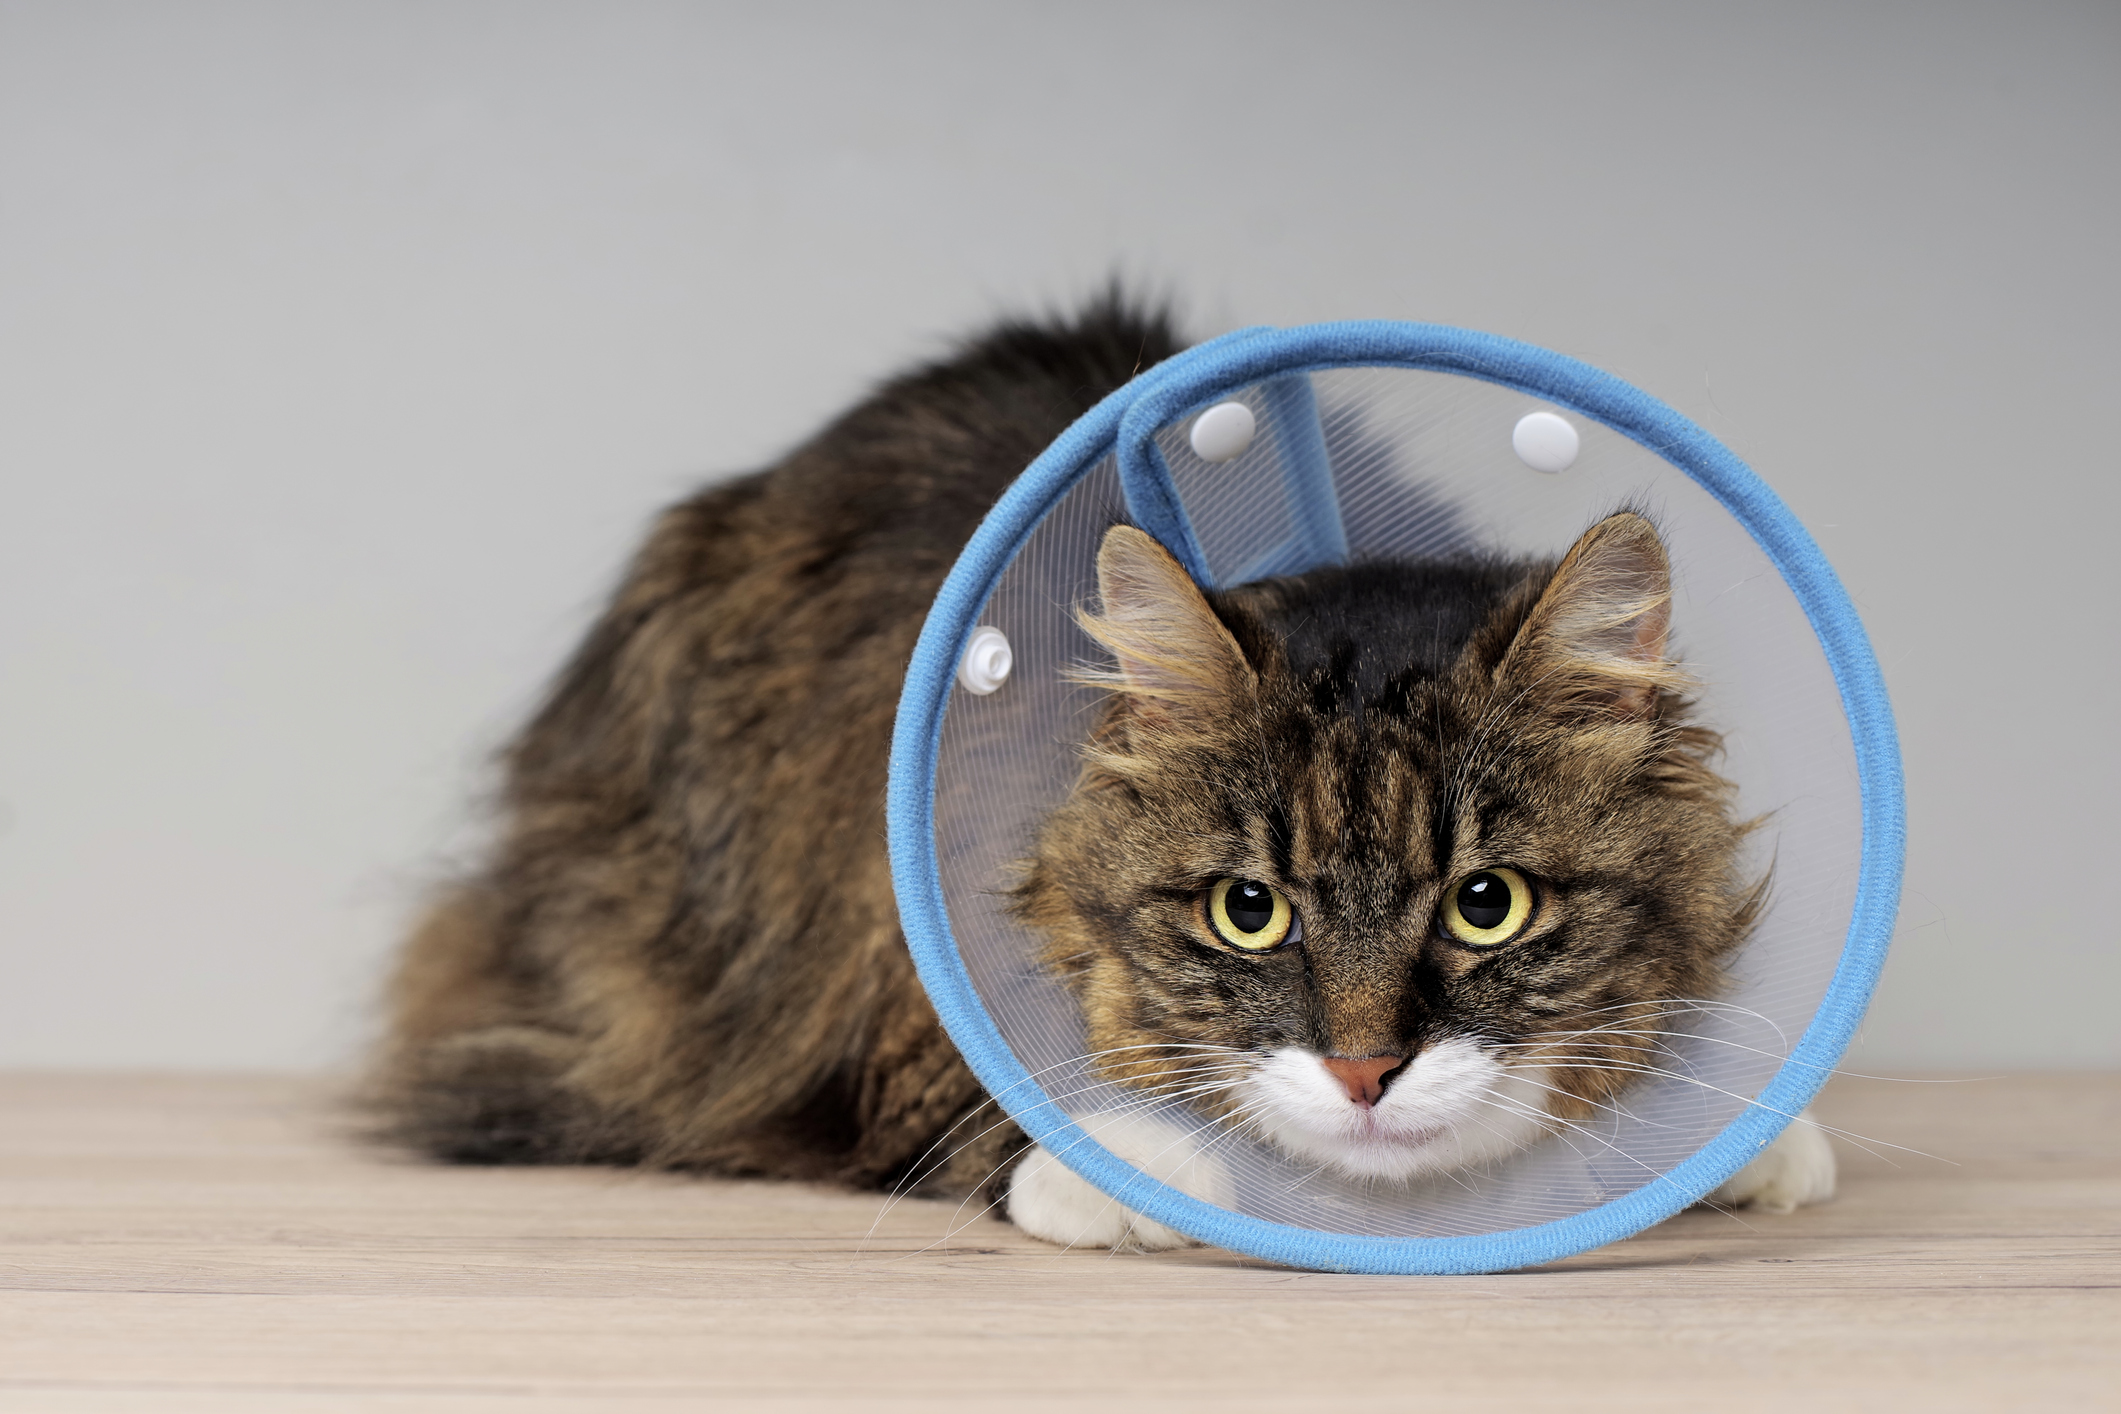 A cat recovers from surgery in an Elizabethan collar